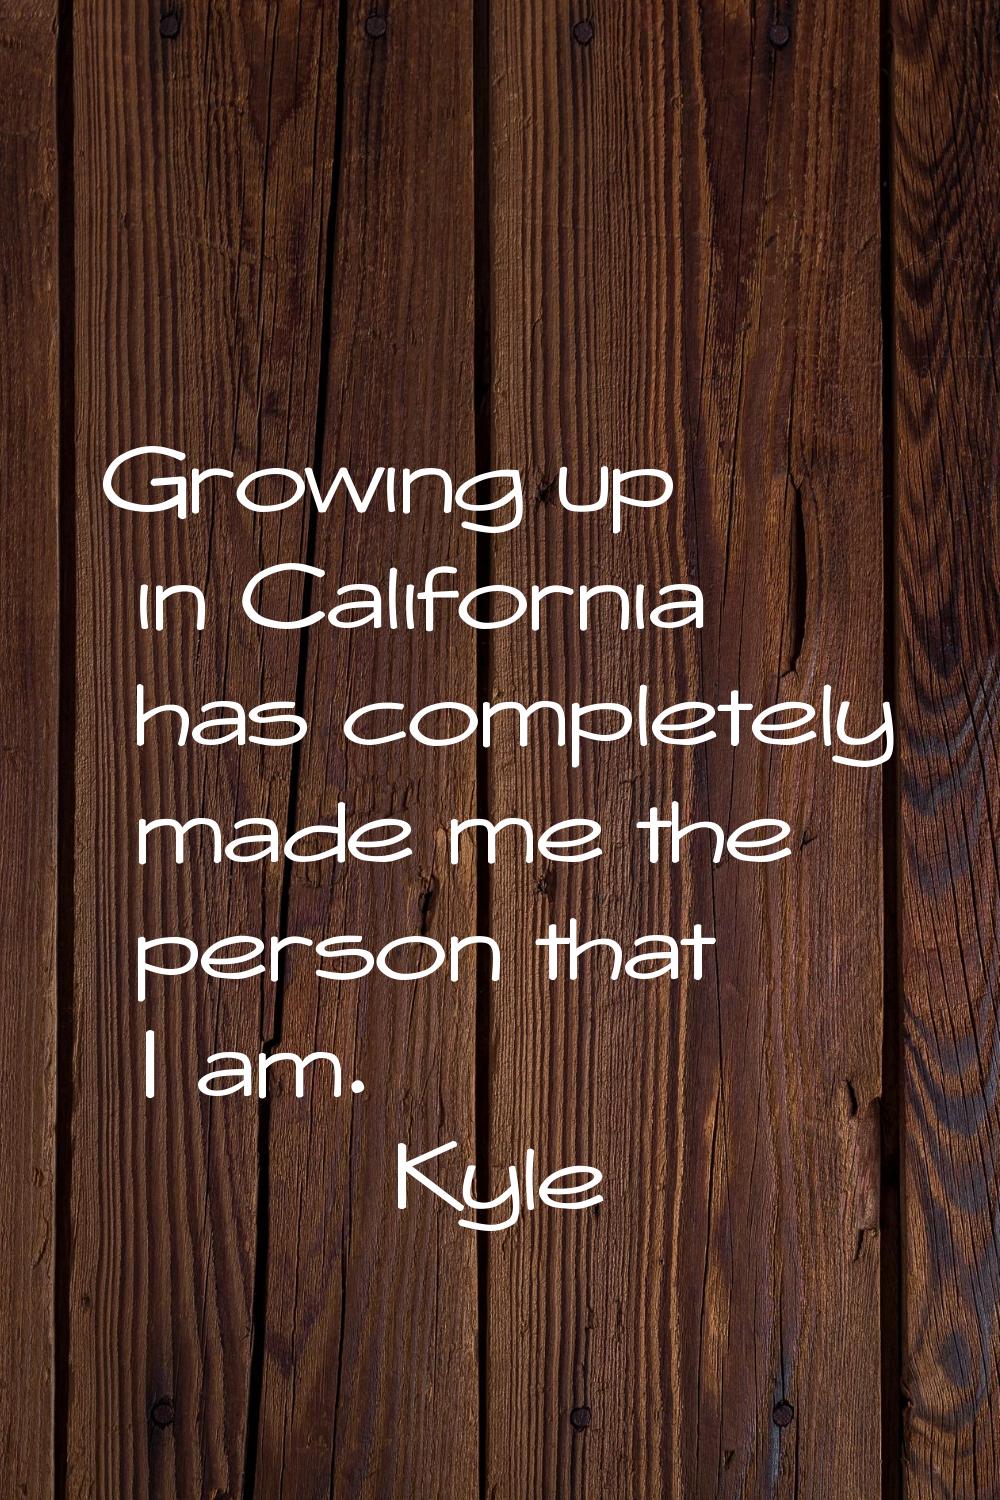 Growing up in California has completely made me the person that I am.